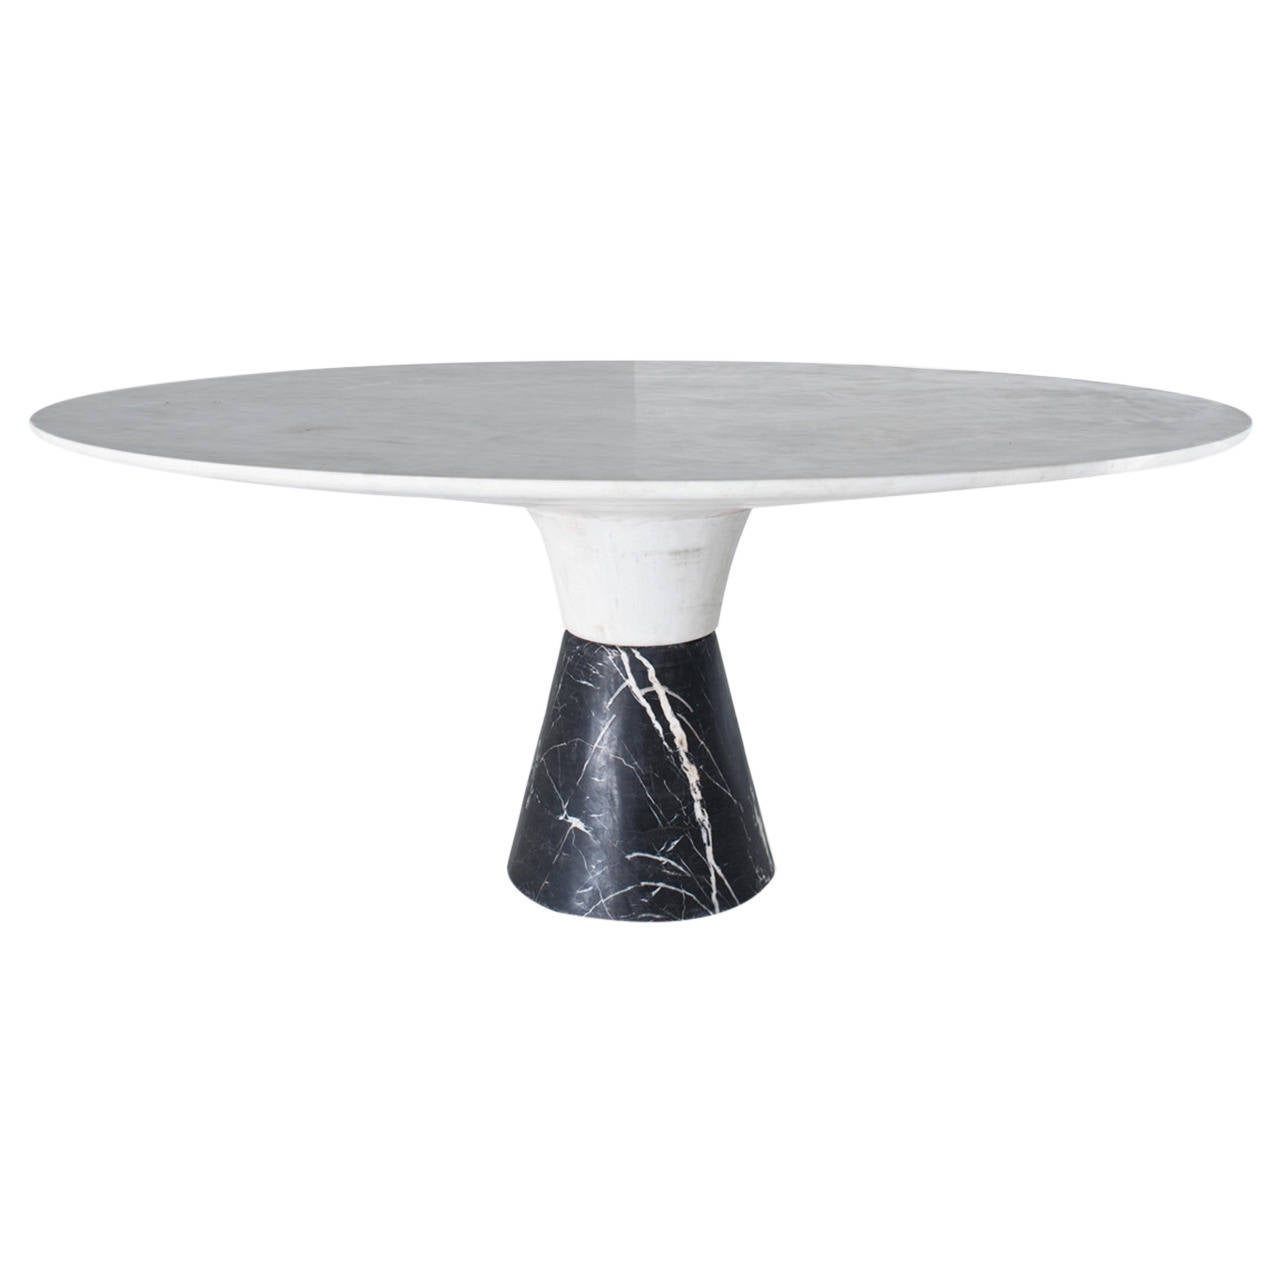 Demarco Dining Table with Solid Hewn White Marble Top and Black Marble